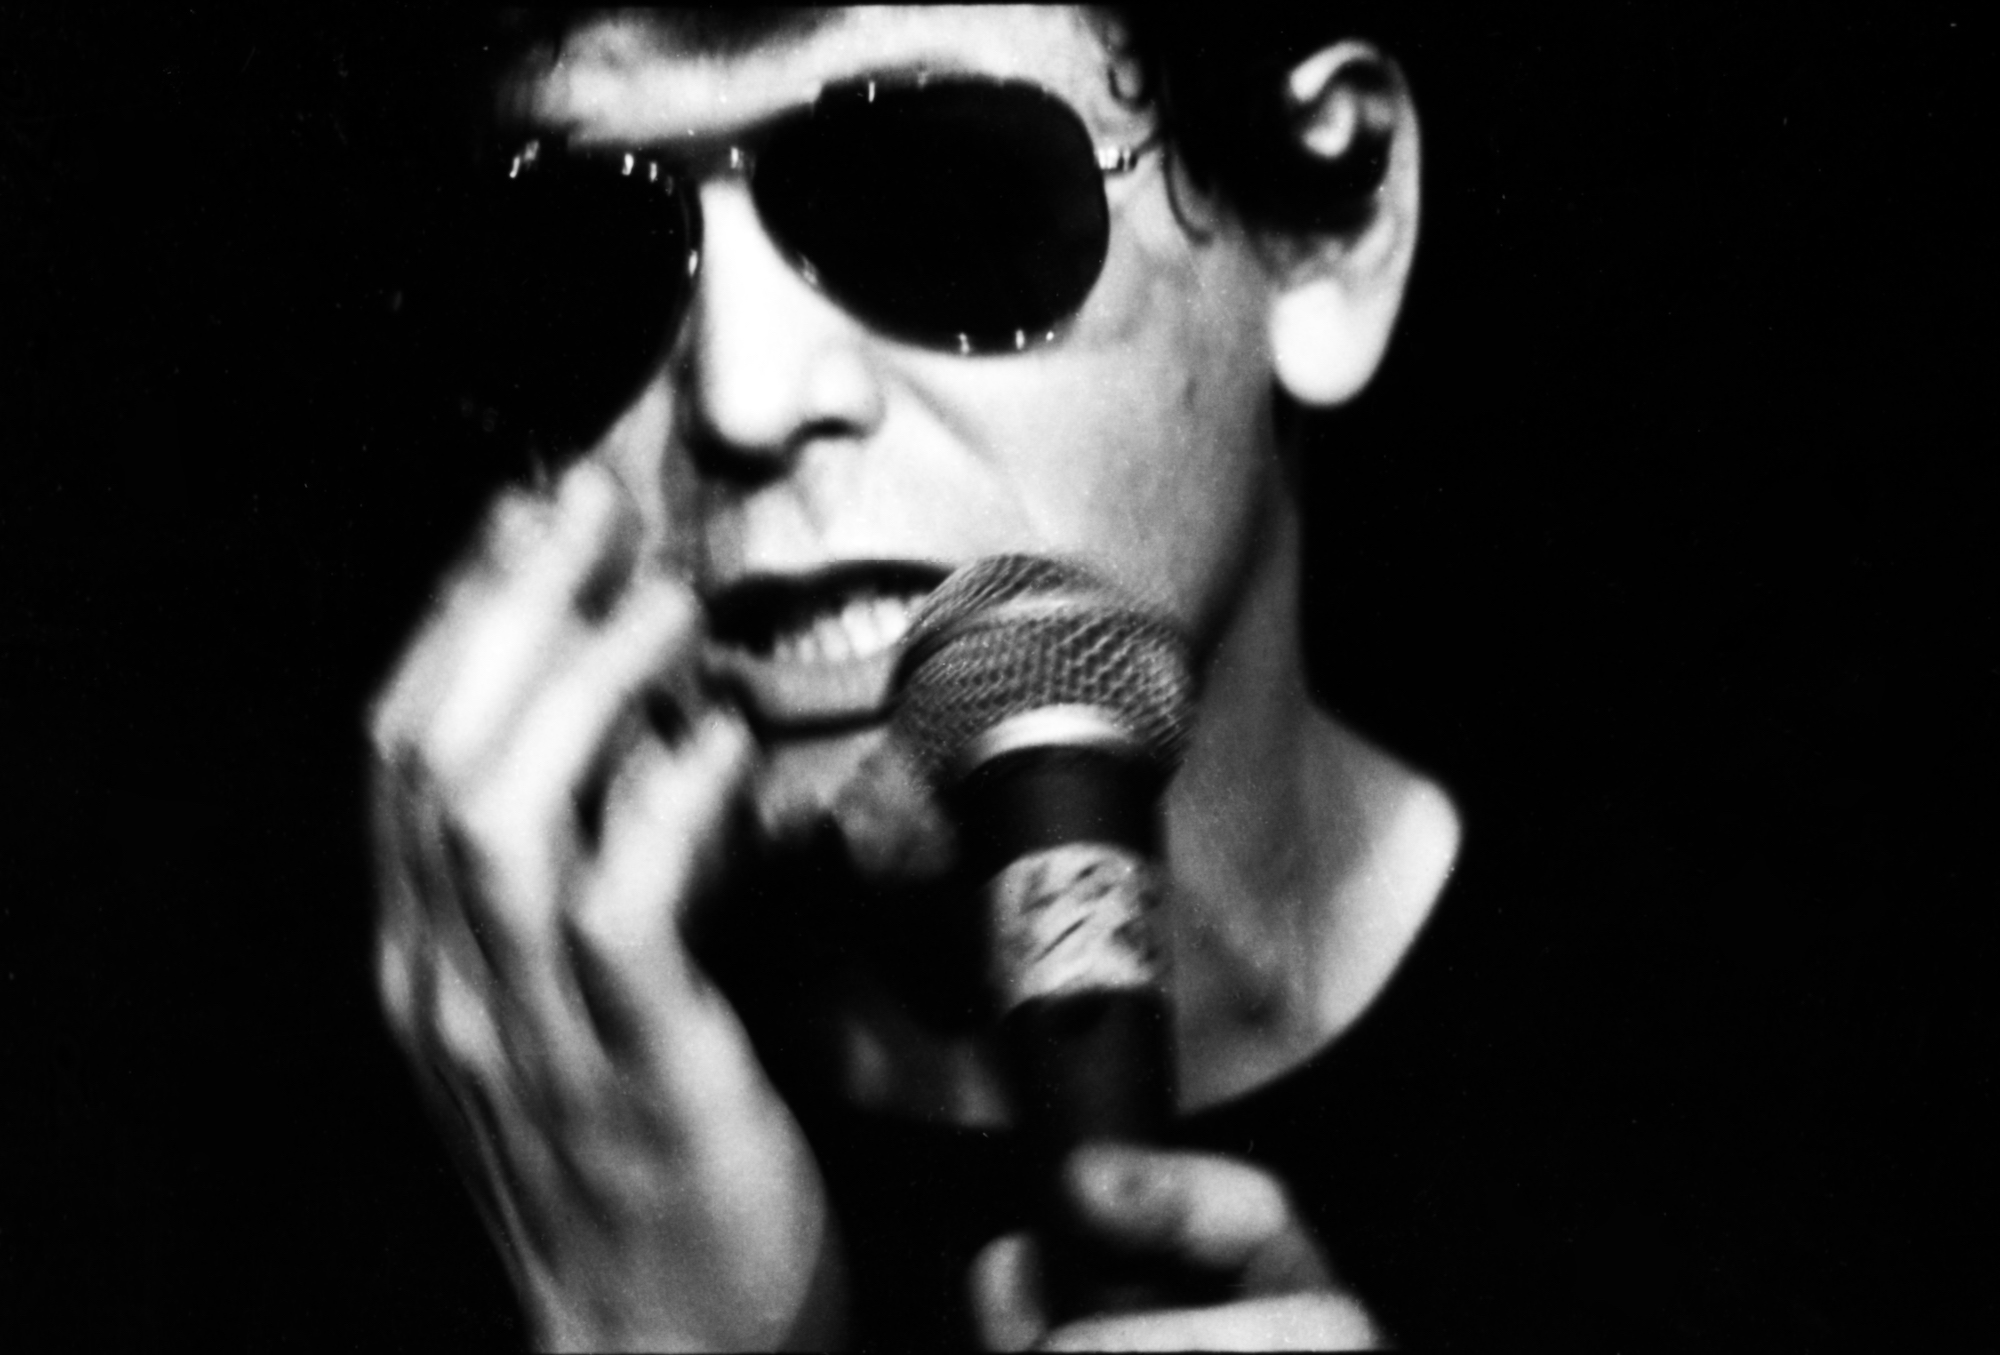 Lou Reed by Thomas Wollenberger